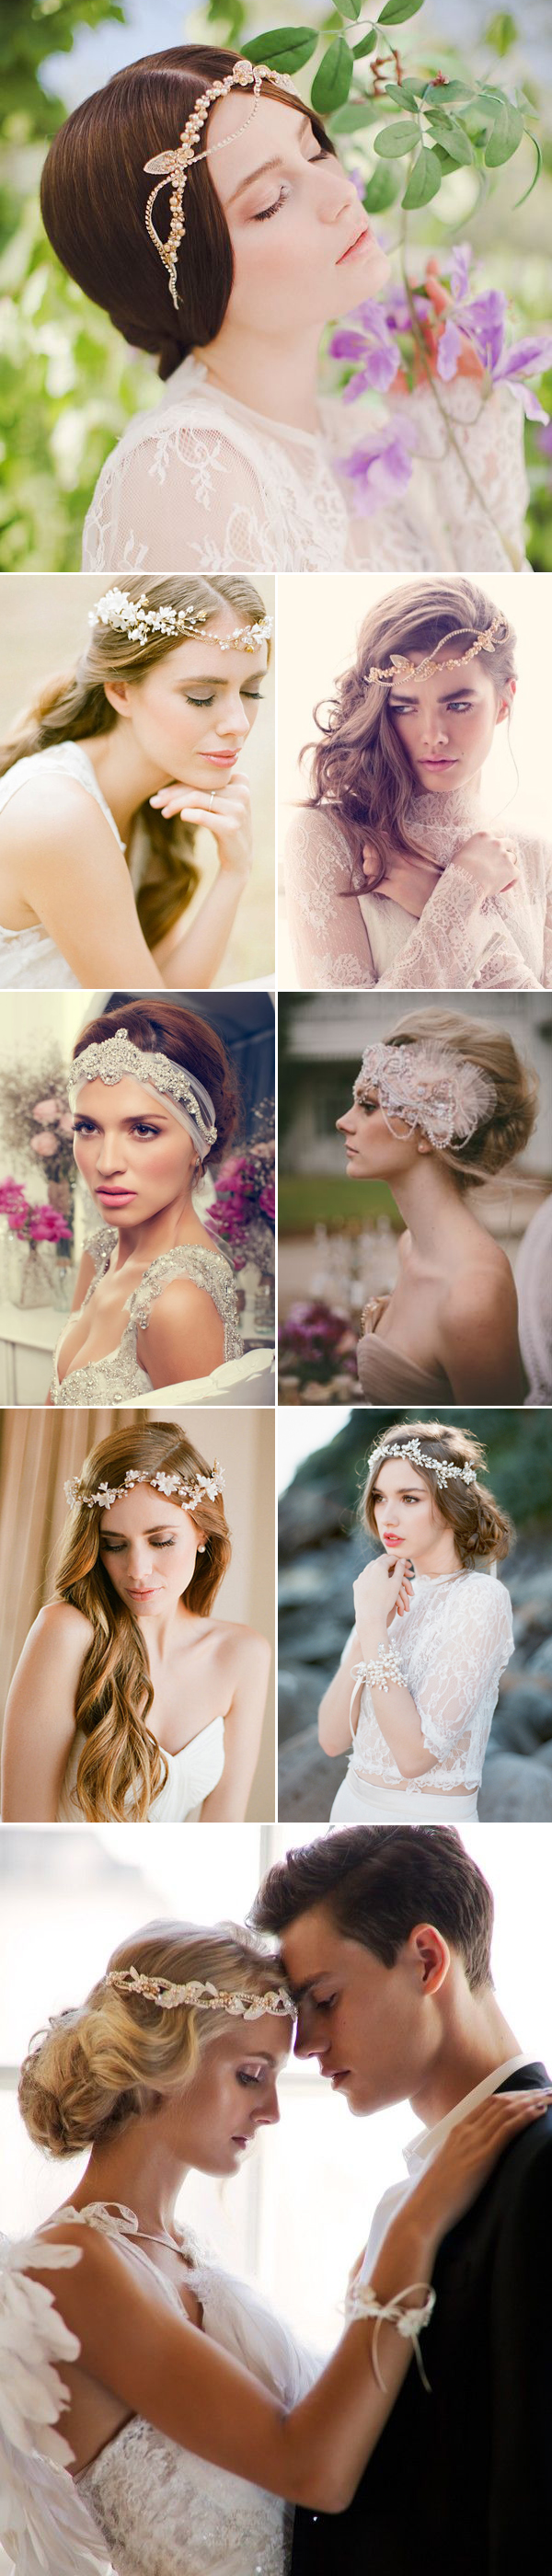 How to Wear a Headband: 25 Ways to Style All Hair Types